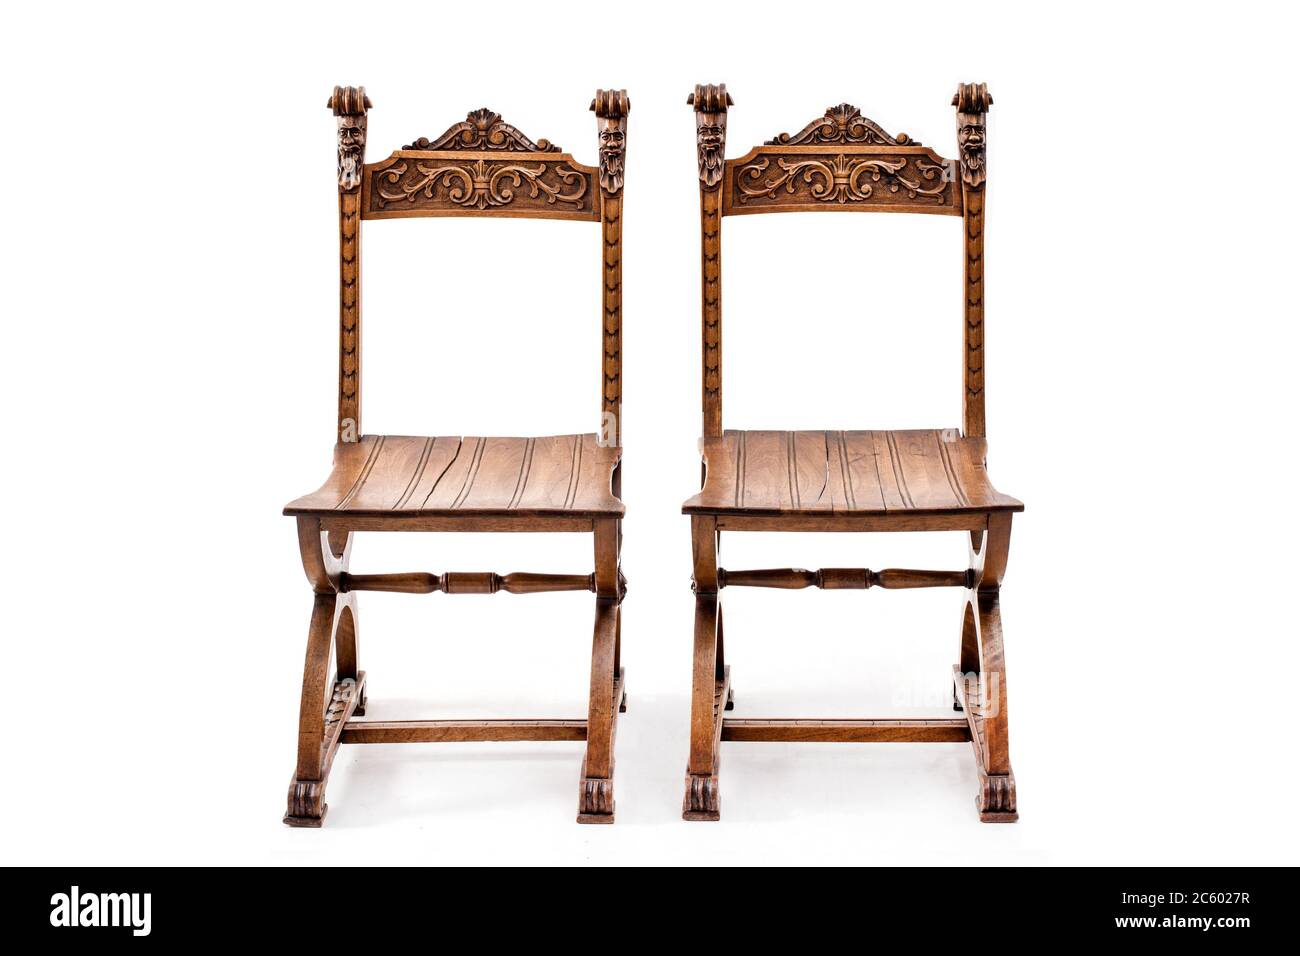 Pair of old fashioned wood chairs on the white background. Stock Photo